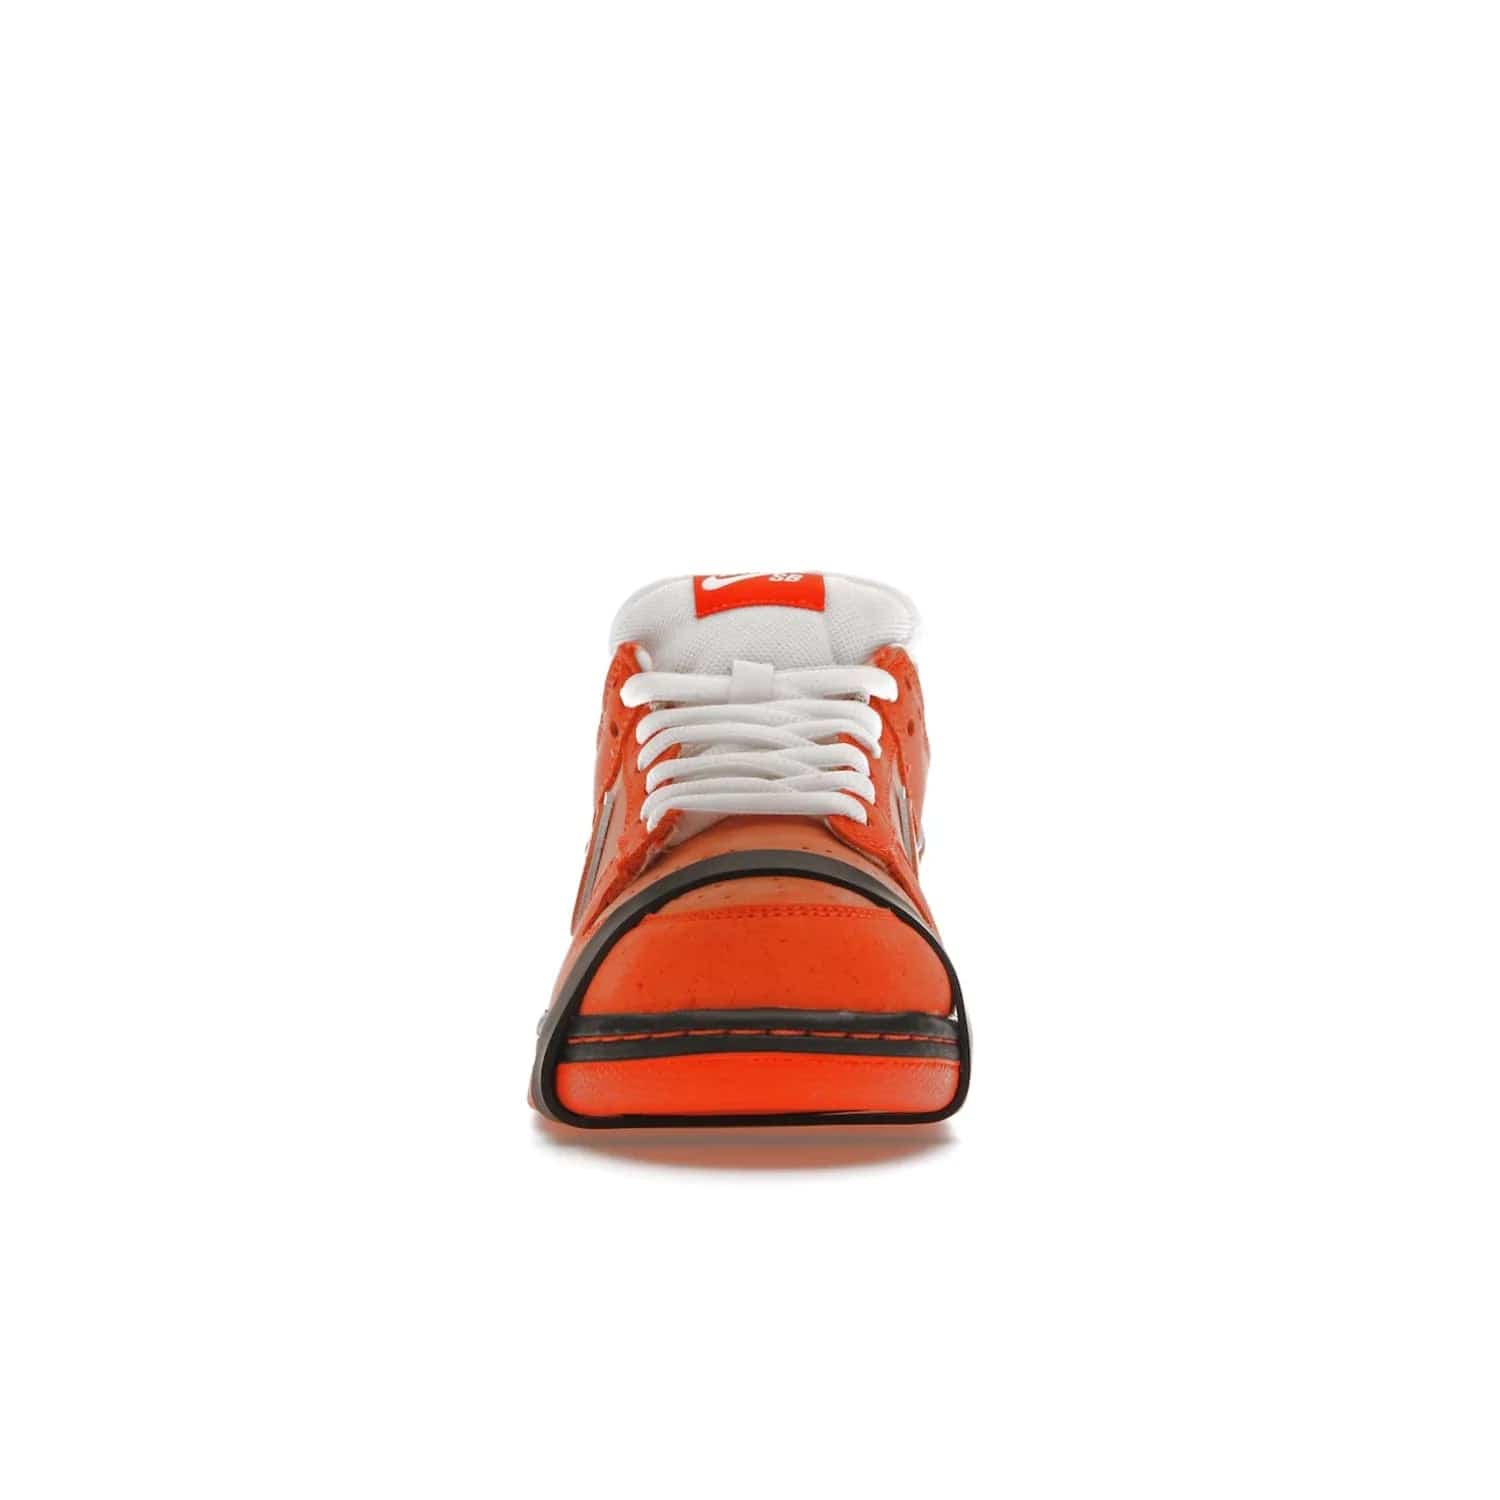 Nike SB Dunk Low Concepts Orange Lobster - Image 10 - Only at www.BallersClubKickz.com - Make a statement with the Nike SB Dunk Low Concepts Orange Lobster. Variety of orange hues, nubuck upper, bib-inspired lining & rubber outsole create bold look & comfortable blend of style. Available December 20th, 2022.